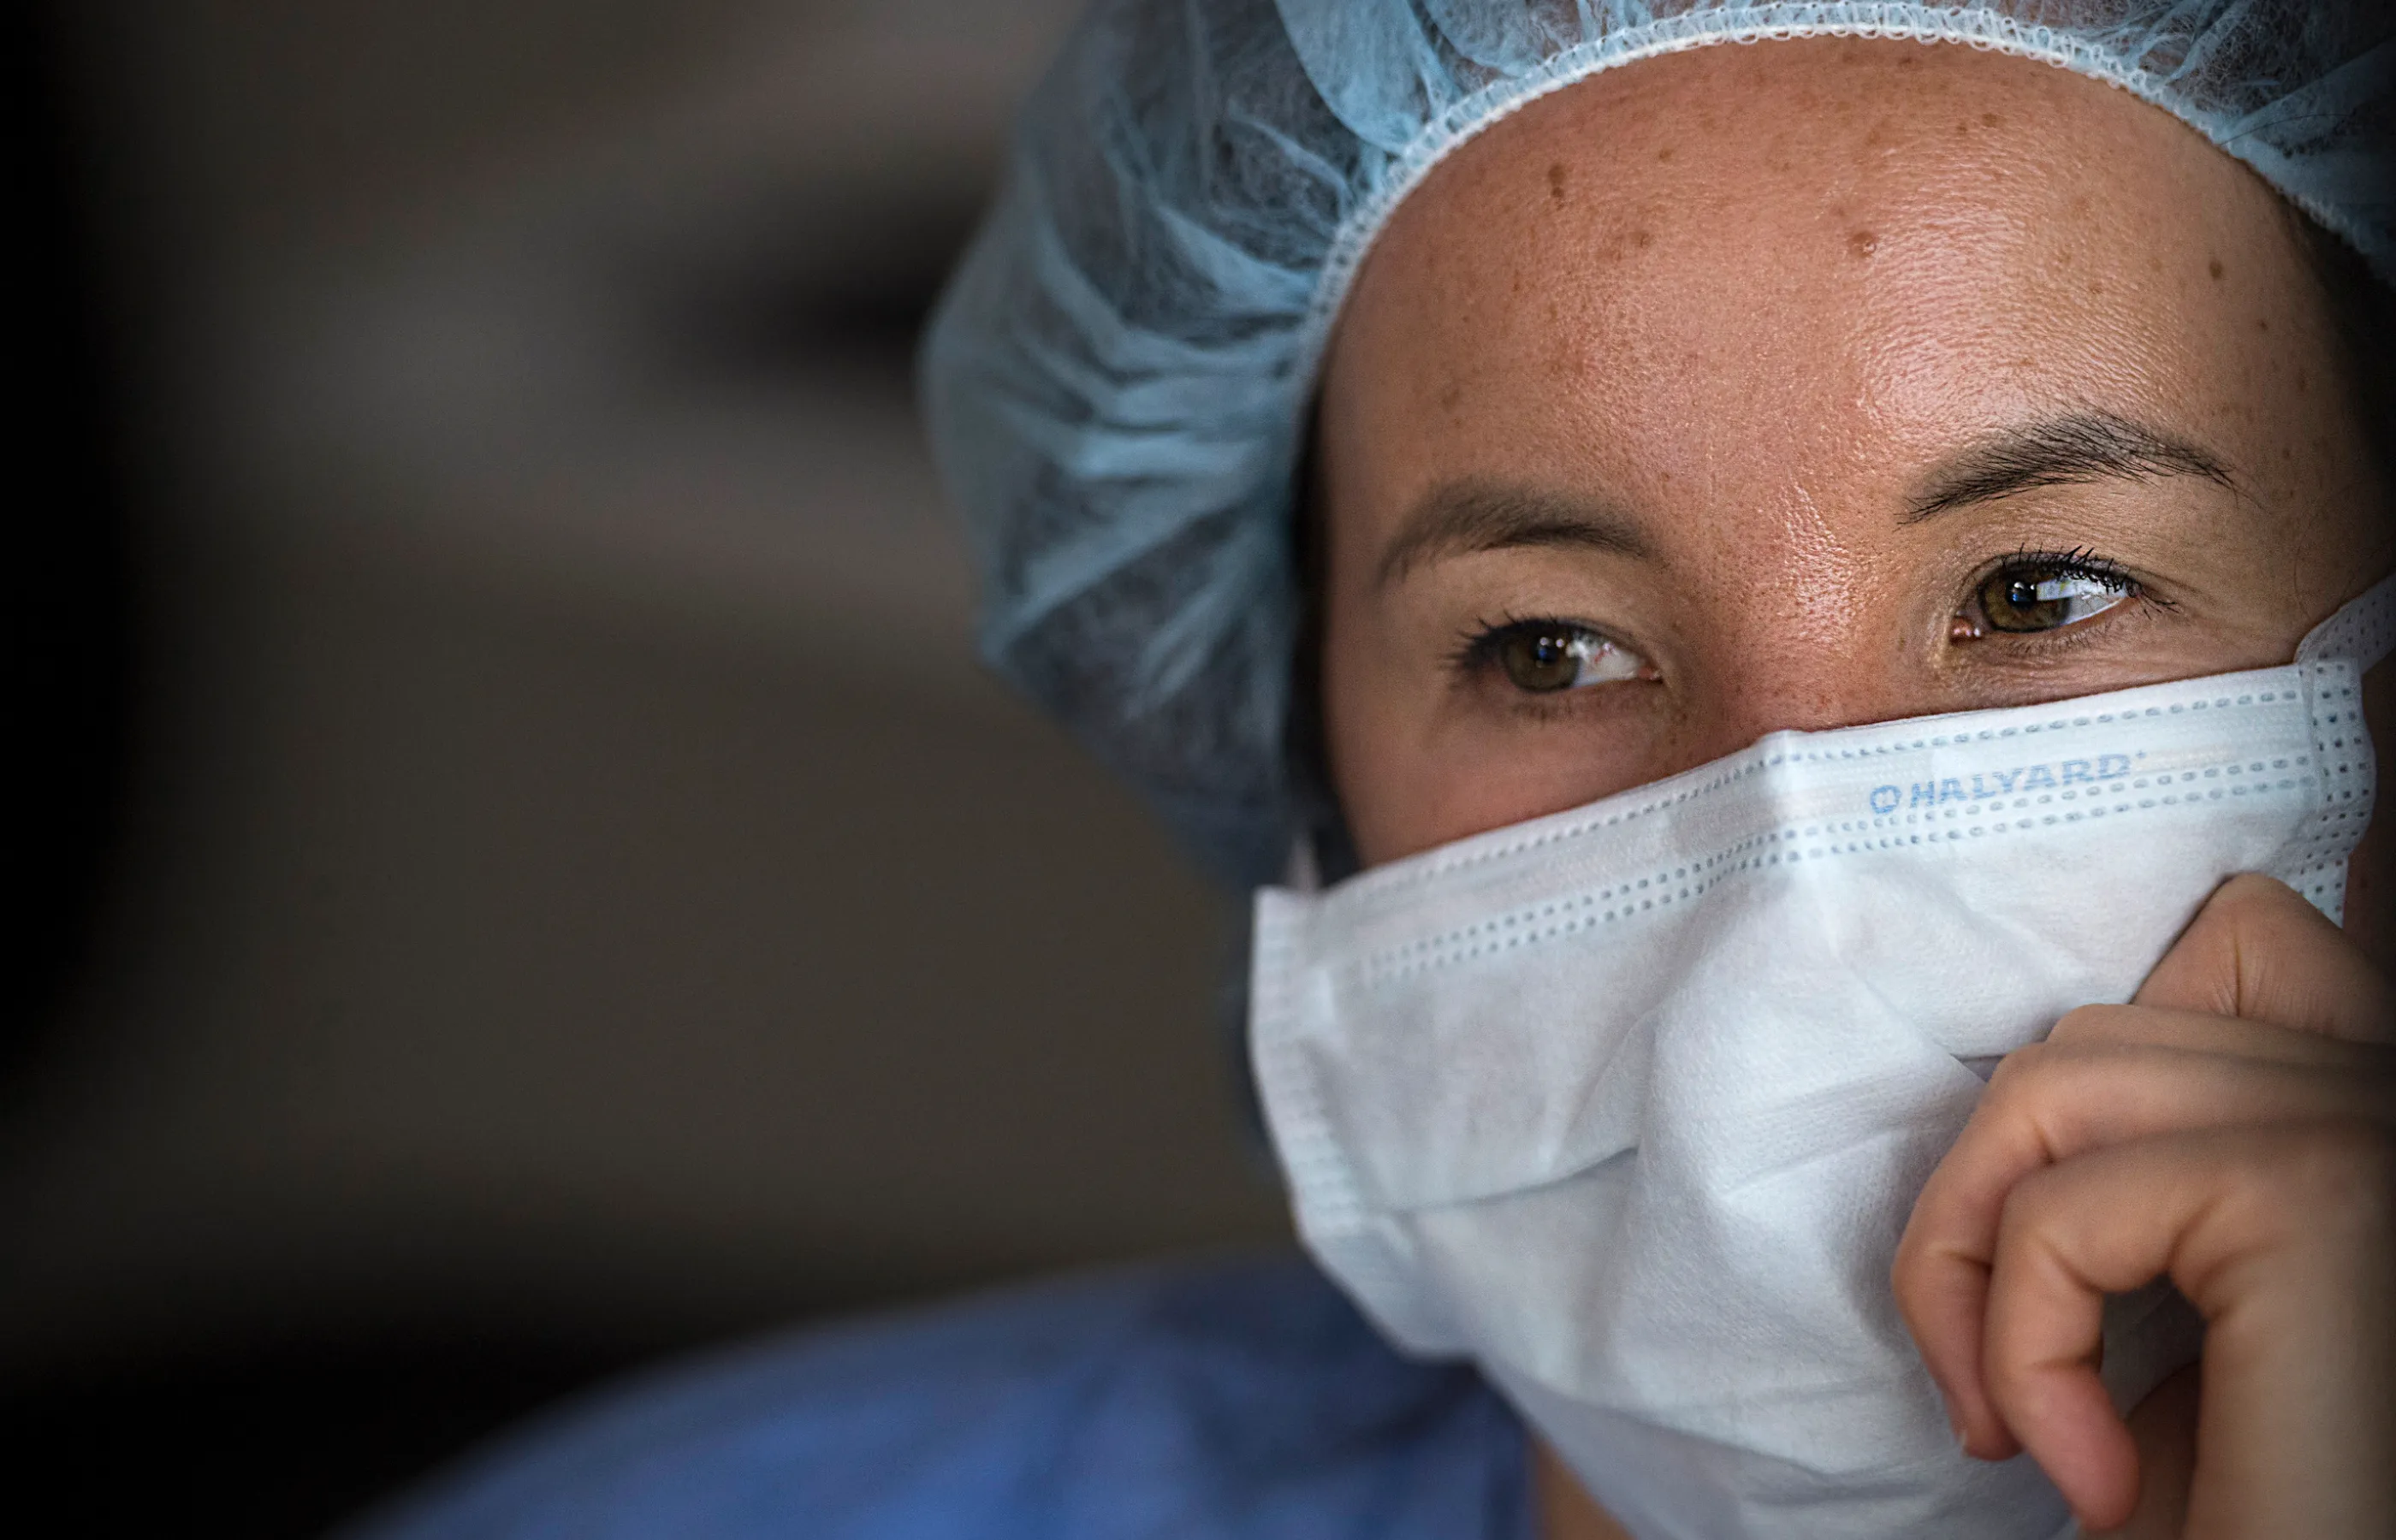 A team member in surgical protective gear (mask and surgical cap) with her hand by her face